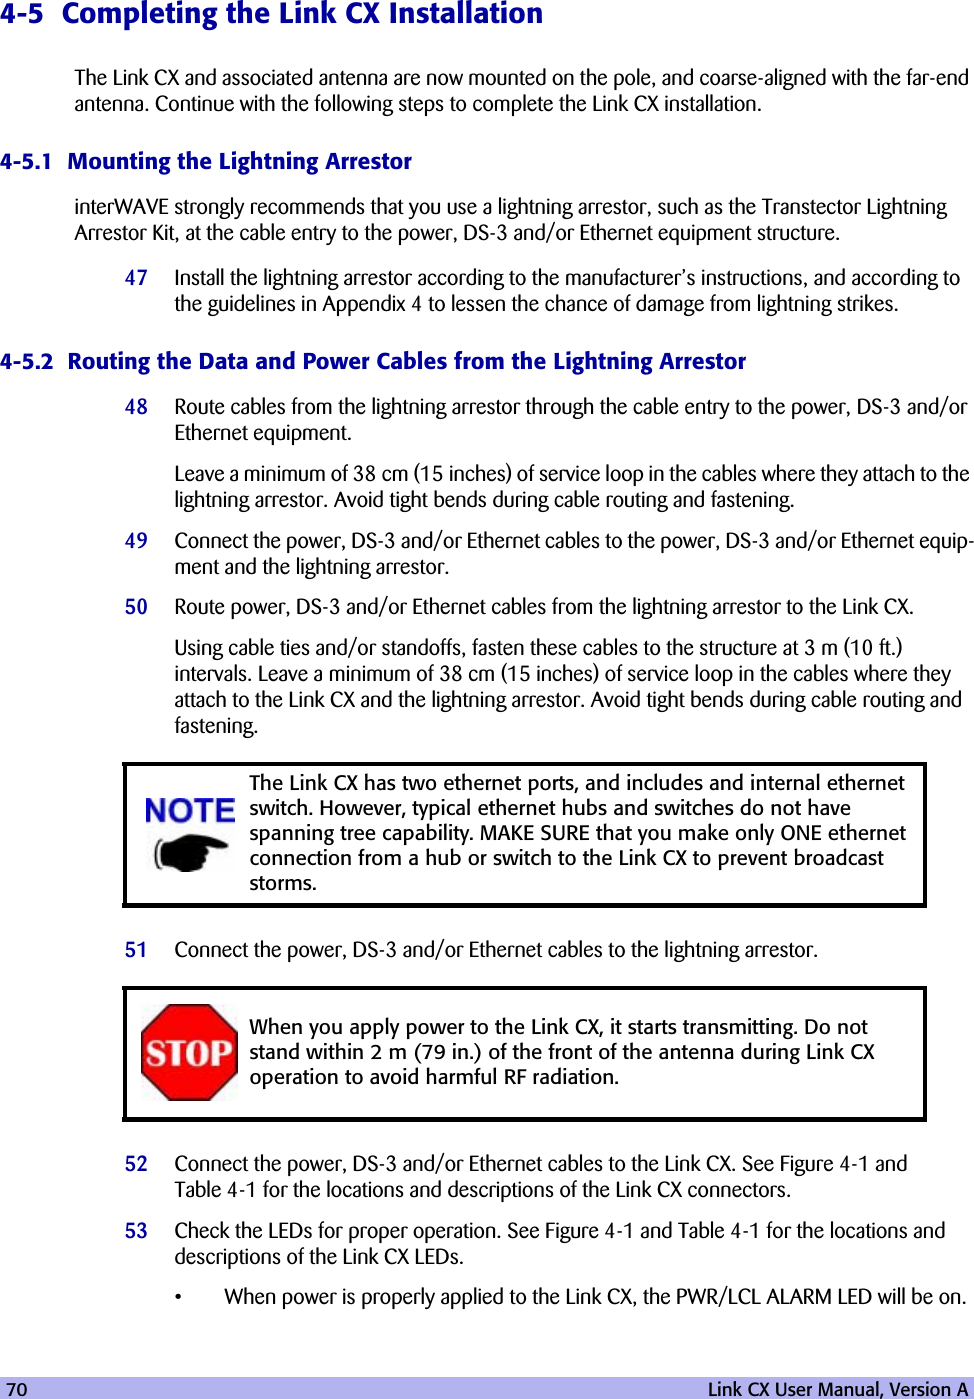 70   Link CX User Manual, Version A4-5  Completing the Link CX InstallationThe Link CX and associated antenna are now mounted on the pole, and coarse-aligned with the far-end antenna. Continue with the following steps to complete the Link CX installation.4-5.1  Mounting the Lightning ArrestorinterWAVE strongly recommends that you use a lightning arrestor, such as the Transtector Lightning Arrestor Kit, at the cable entry to the power, DS-3 and/or Ethernet equipment structure. 47 Install the lightning arrestor according to the manufacturer’s instructions, and according to the guidelines in Appendix 4 to lessen the chance of damage from lightning strikes.4-5.2  Routing the Data and Power Cables from the Lightning Arrestor48 Route cables from the lightning arrestor through the cable entry to the power, DS-3 and/or Ethernet equipment.Leave a minimum of 38 cm (15 inches) of service loop in the cables where they attach to the lightning arrestor. Avoid tight bends during cable routing and fastening.49 Connect the power, DS-3 and/or Ethernet cables to the power, DS-3 and/or Ethernet equip-ment and the lightning arrestor.50 Route power, DS-3 and/or Ethernet cables from the lightning arrestor to the Link CX. Using cable ties and/or standoffs, fasten these cables to the structure at 3 m (10 ft.) intervals. Leave a minimum of 38 cm (15 inches) of service loop in the cables where they attach to the Link CX and the lightning arrestor. Avoid tight bends during cable routing and fastening.51 Connect the power, DS-3 and/or Ethernet cables to the lightning arrestor.52 Connect the power, DS-3 and/or Ethernet cables to the Link CX. See Figure 4-1 and Table 4-1 for the locations and descriptions of the Link CX connectors.53 Check the LEDs for proper operation. See Figure 4-1 and Table 4-1 for the locations and descriptions of the Link CX LEDs.•When power is properly applied to the Link CX, the PWR/LCL ALARM LED will be on.The Link CX has two ethernet ports, and includes and internal ethernet switch. However, typical ethernet hubs and switches do not have spanning tree capability. MAKE SURE that you make only ONE ethernet connection from a hub or switch to the Link CX to prevent broadcast storms.When you apply power to the Link CX, it starts transmitting. Do not stand within 2 m (79 in.) of the front of the antenna during Link CX operation to avoid harmful RF radiation. 